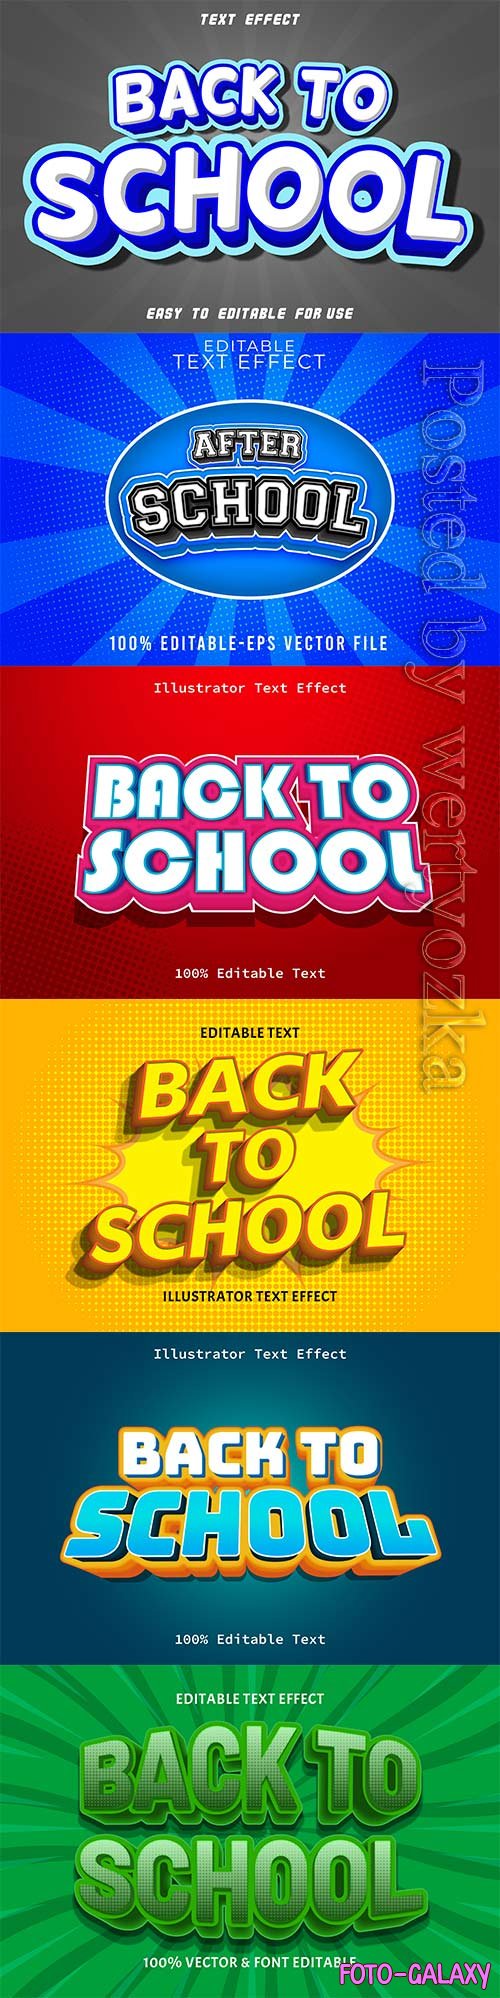 Back to school editable text effect vol 8